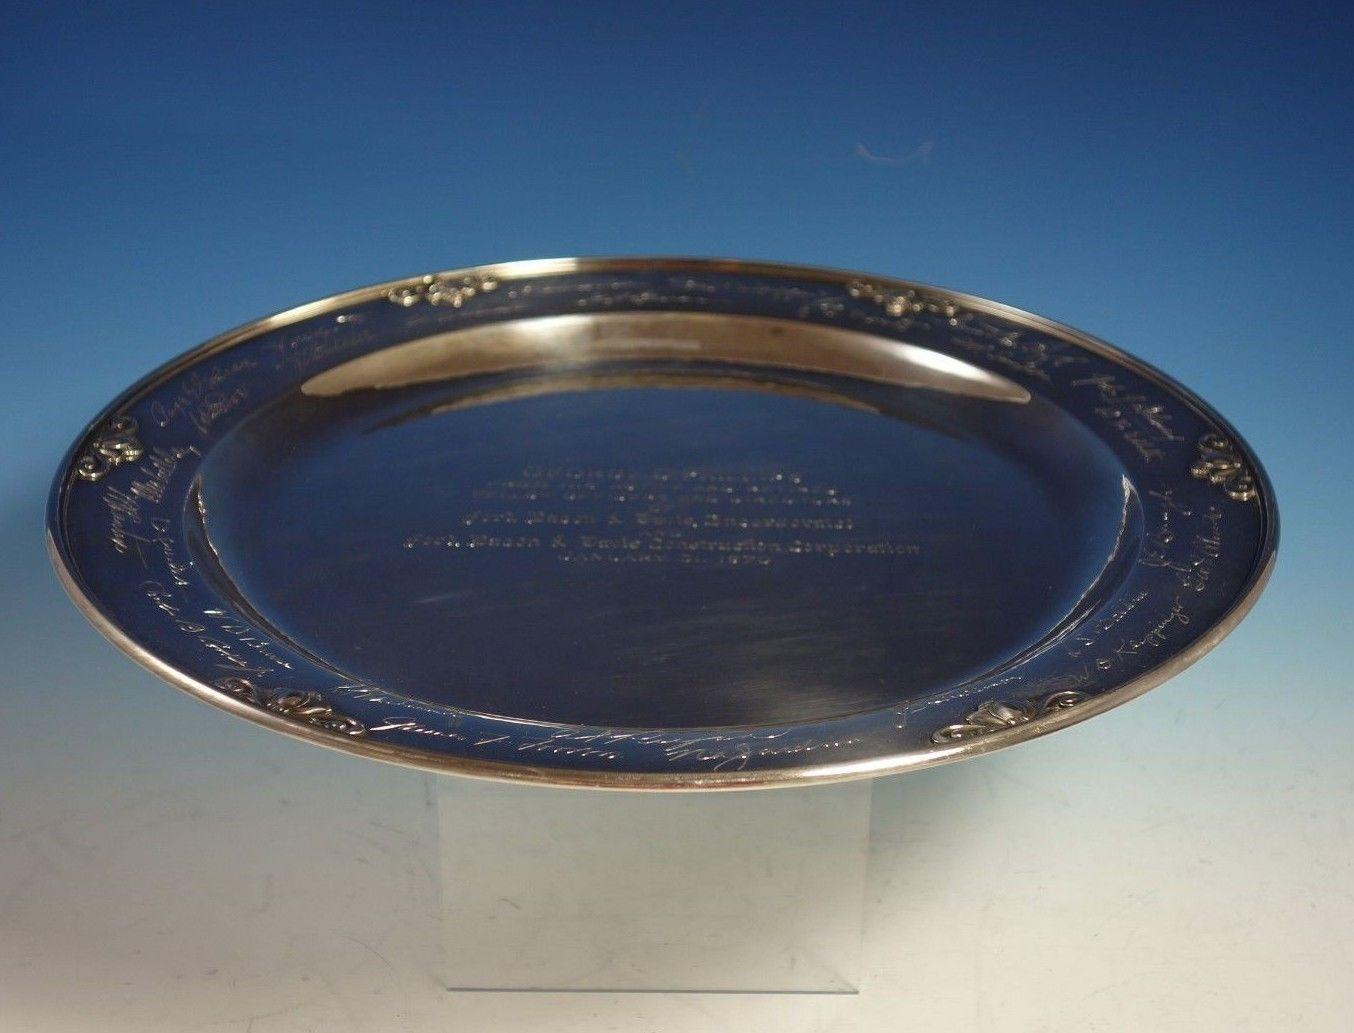 Gorgeous Acorn by Georg Jensen sterling silver round serving tray / plate/ platter marked #642C. The platter has an inscription and was presented to George O. Phillips from Ford, Bacon & Davis Inc. Construction Co. January 31, 1970. 
The platter